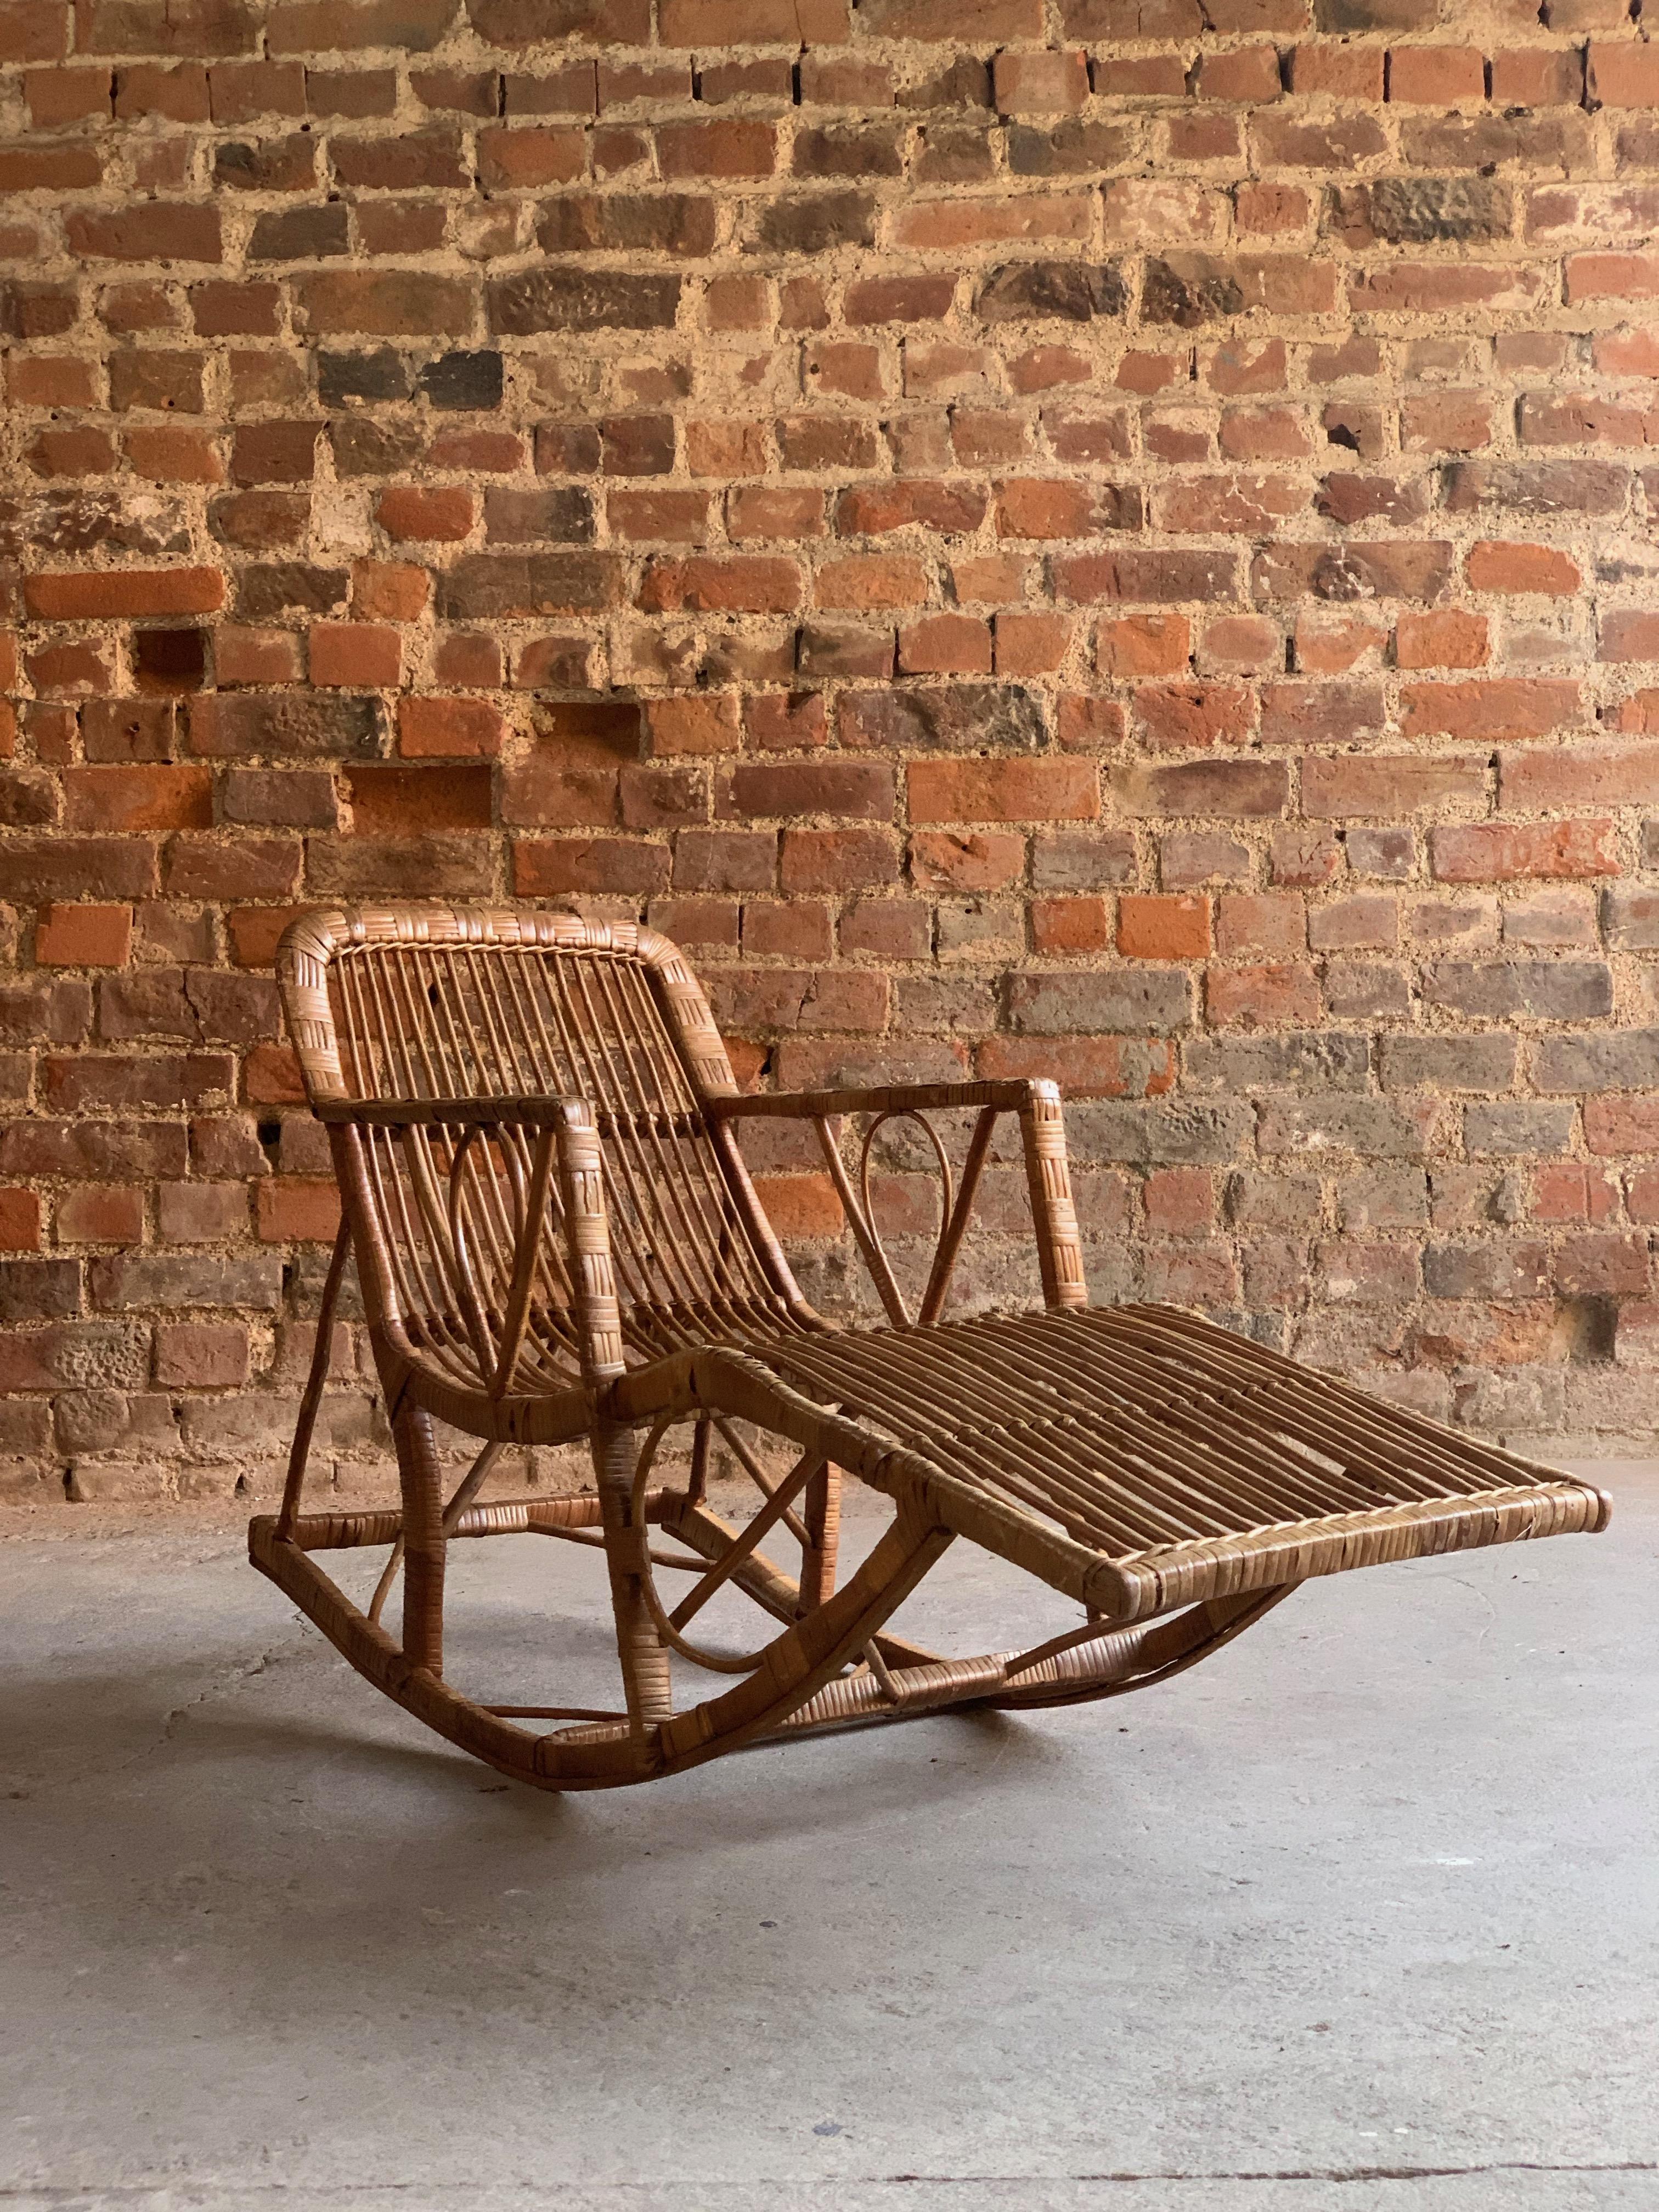 Rustic Midcentury Rattan Daybed Chaise Longue Rocker Madeira, circa 1950